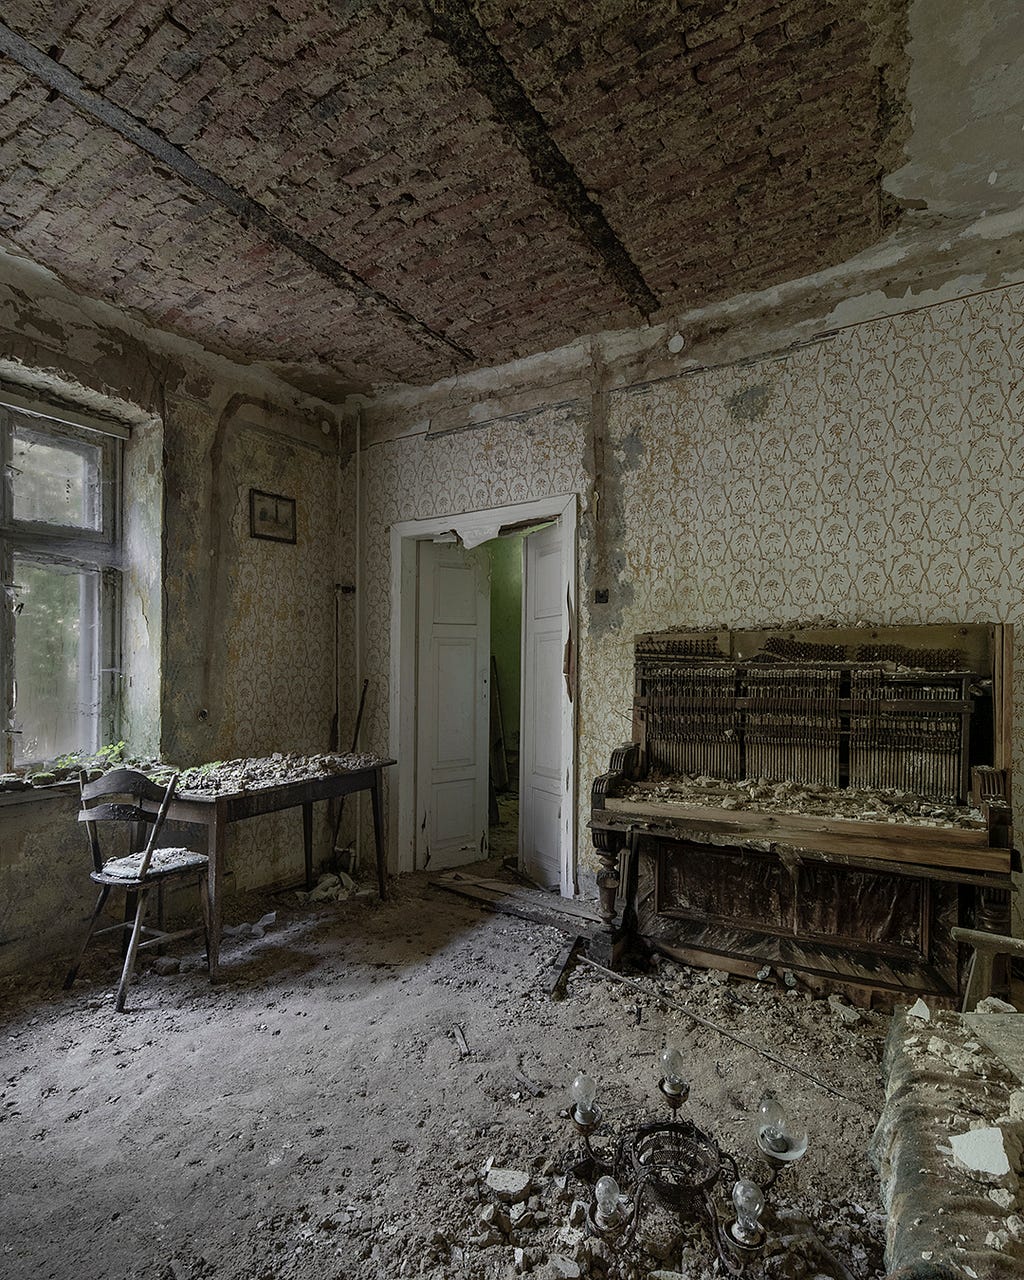 Interior of an abandoned house. In the photo there is a piano, table and a chair and wallpapers which are covered in mold.